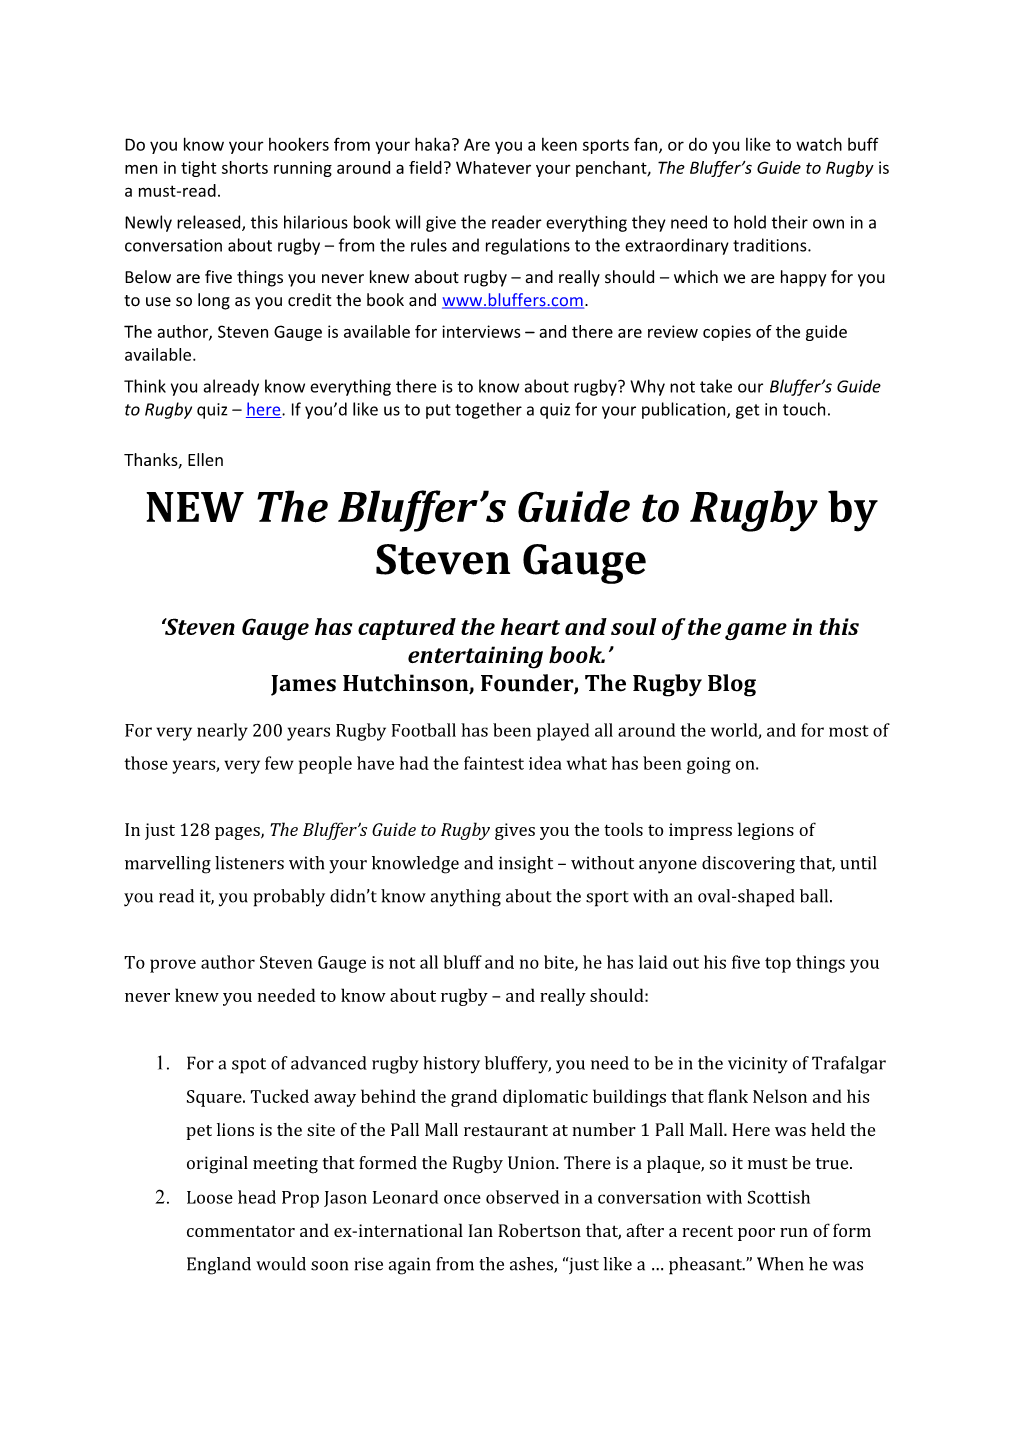 NEW the Bluffer S Guide to Rugby by Steven Gauge